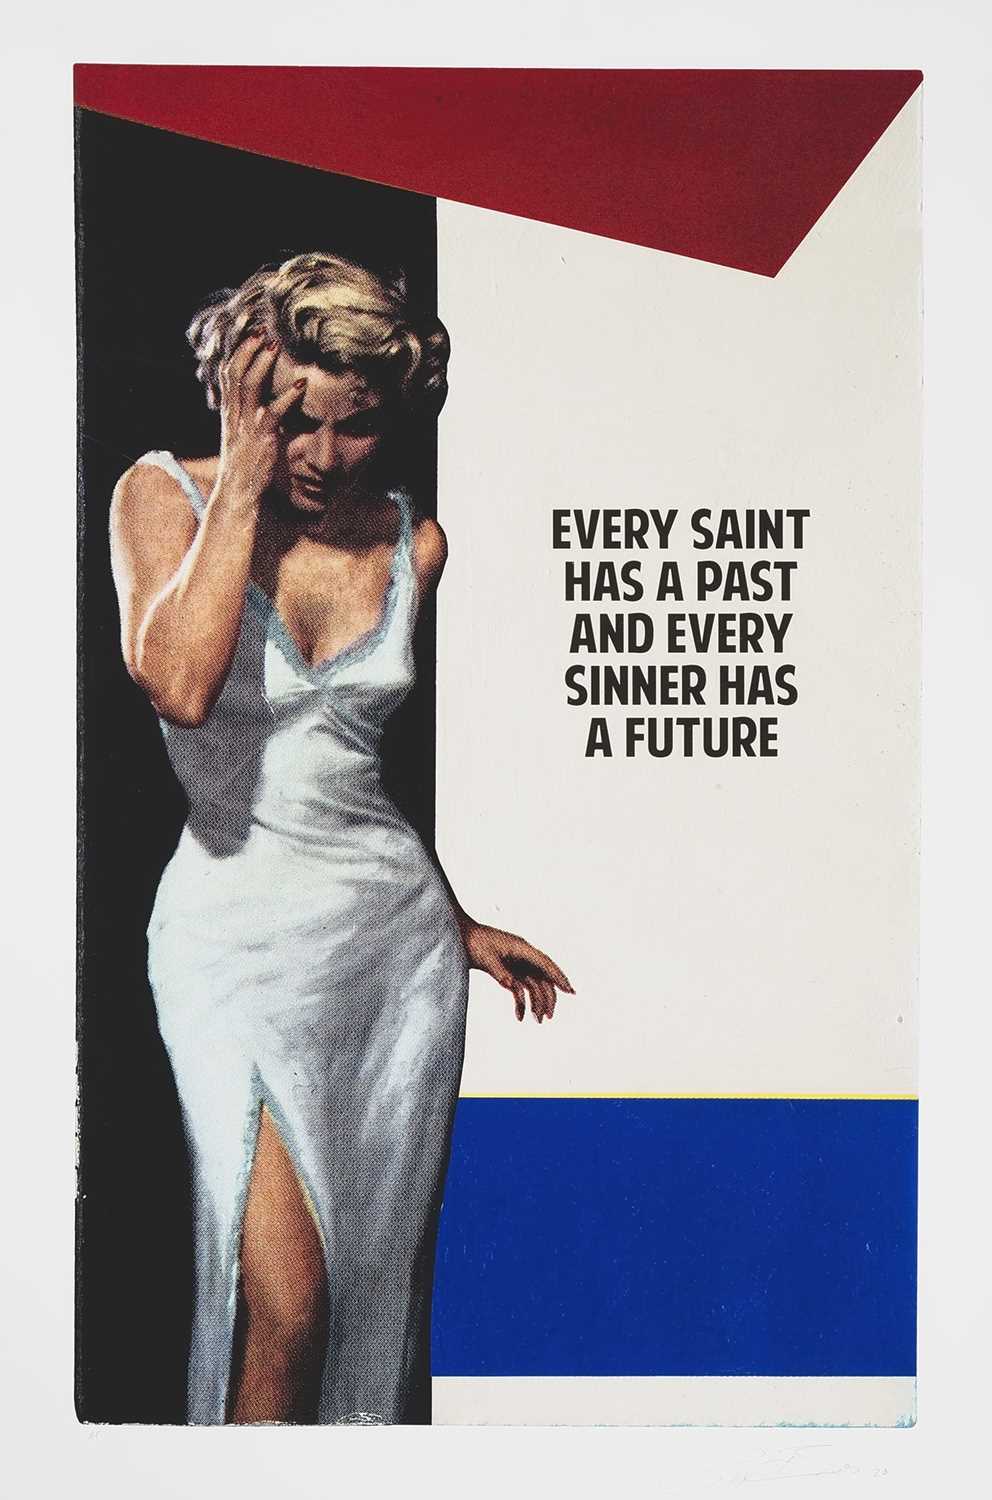 Lot 125 - Connor Brothers (British Duo), 'Every Saint Has A Past And Every Sinner Has A Future', 2020